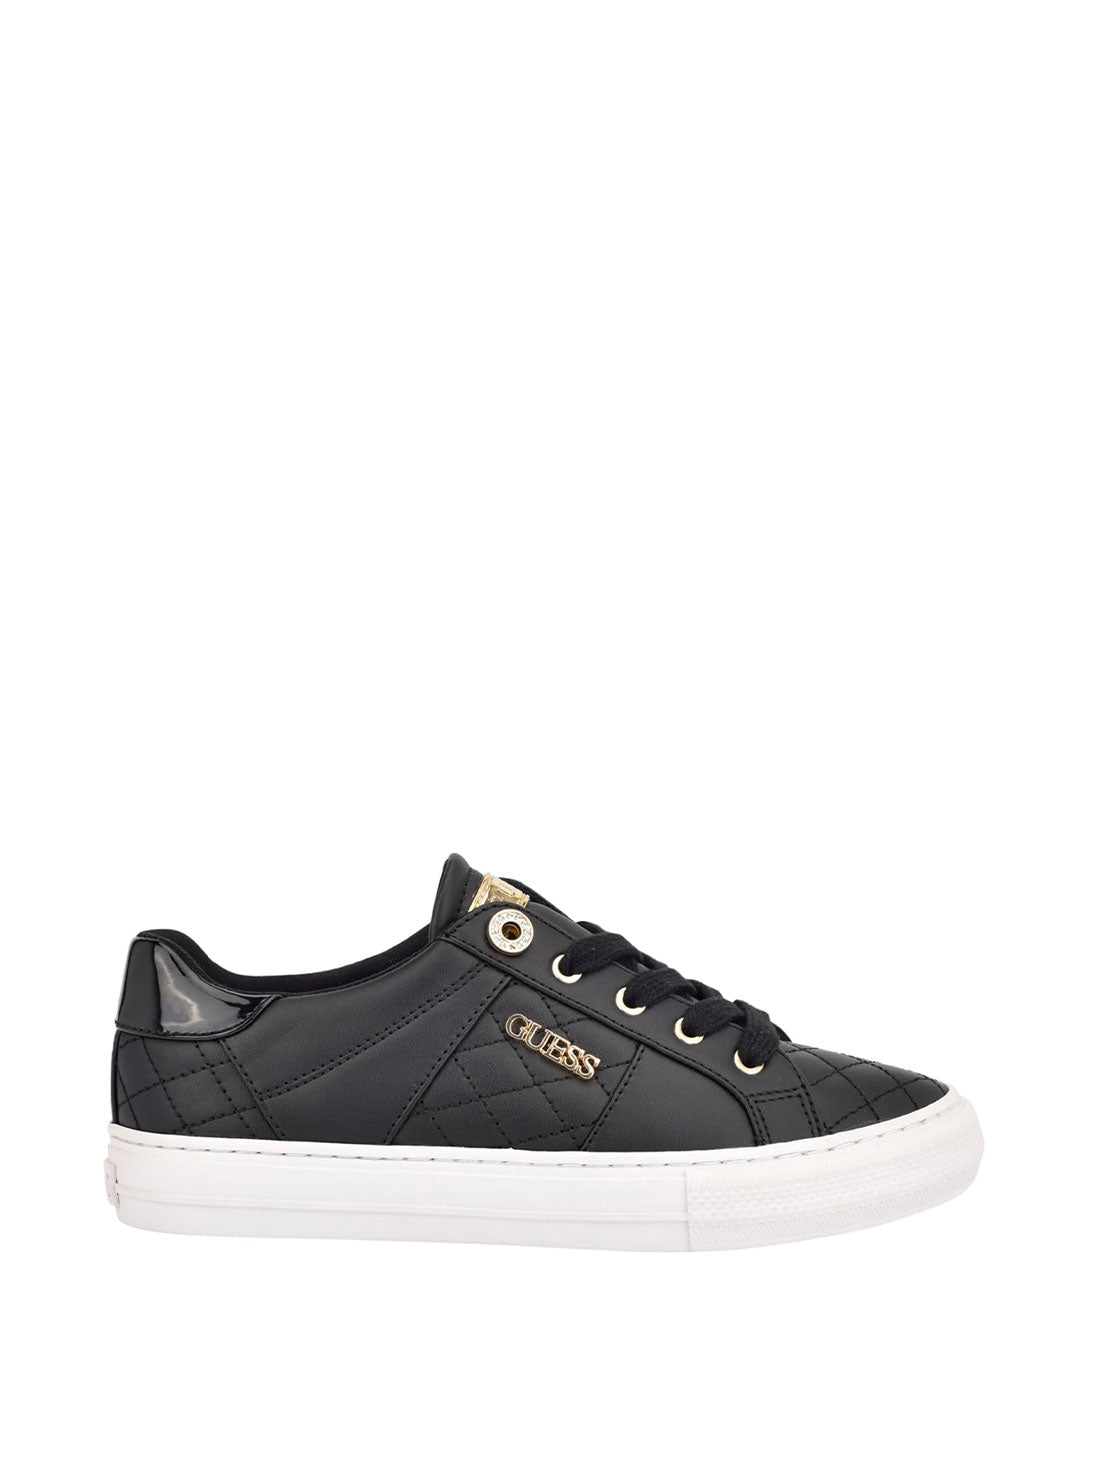 GUESS Black Gold Loven Low-Top Sneakers side view